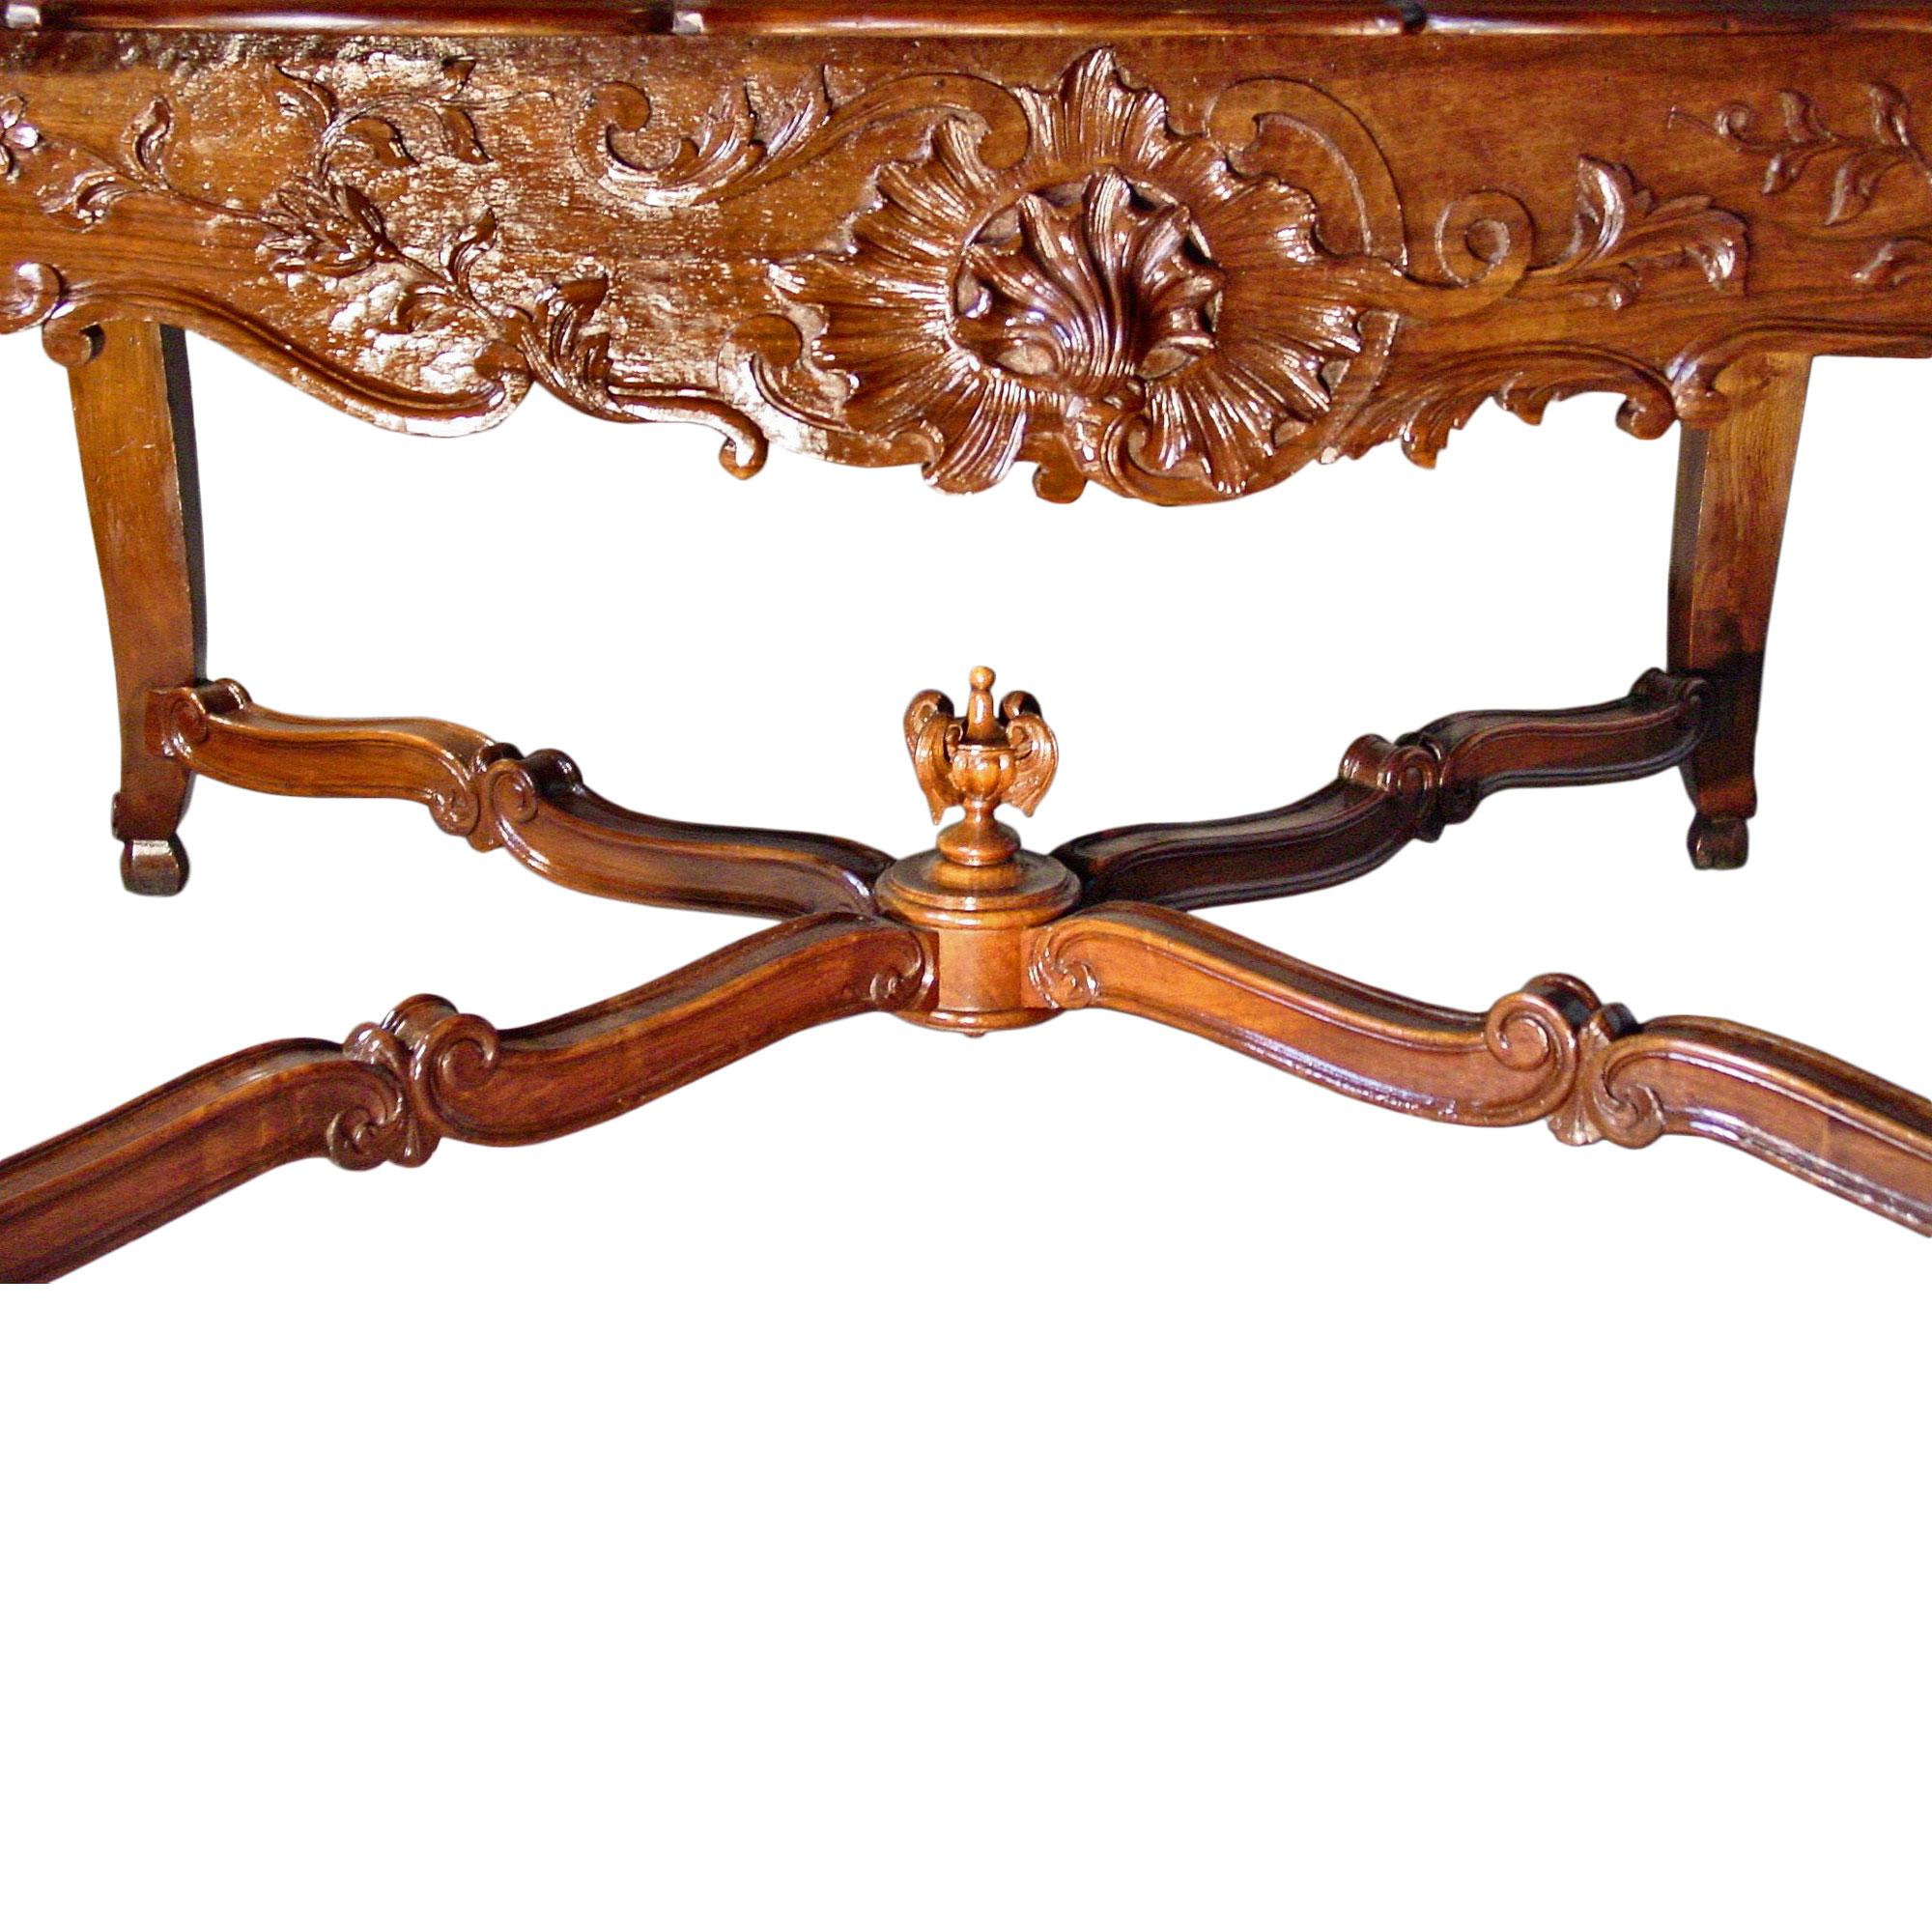 A stunning and fine French 19th century dark oak center table with exquisite carvings of a central shell amidst another shell. On the sides is carved lattice work with flowers. The table raised on cabriole legs has carvings of acanthus leaves as